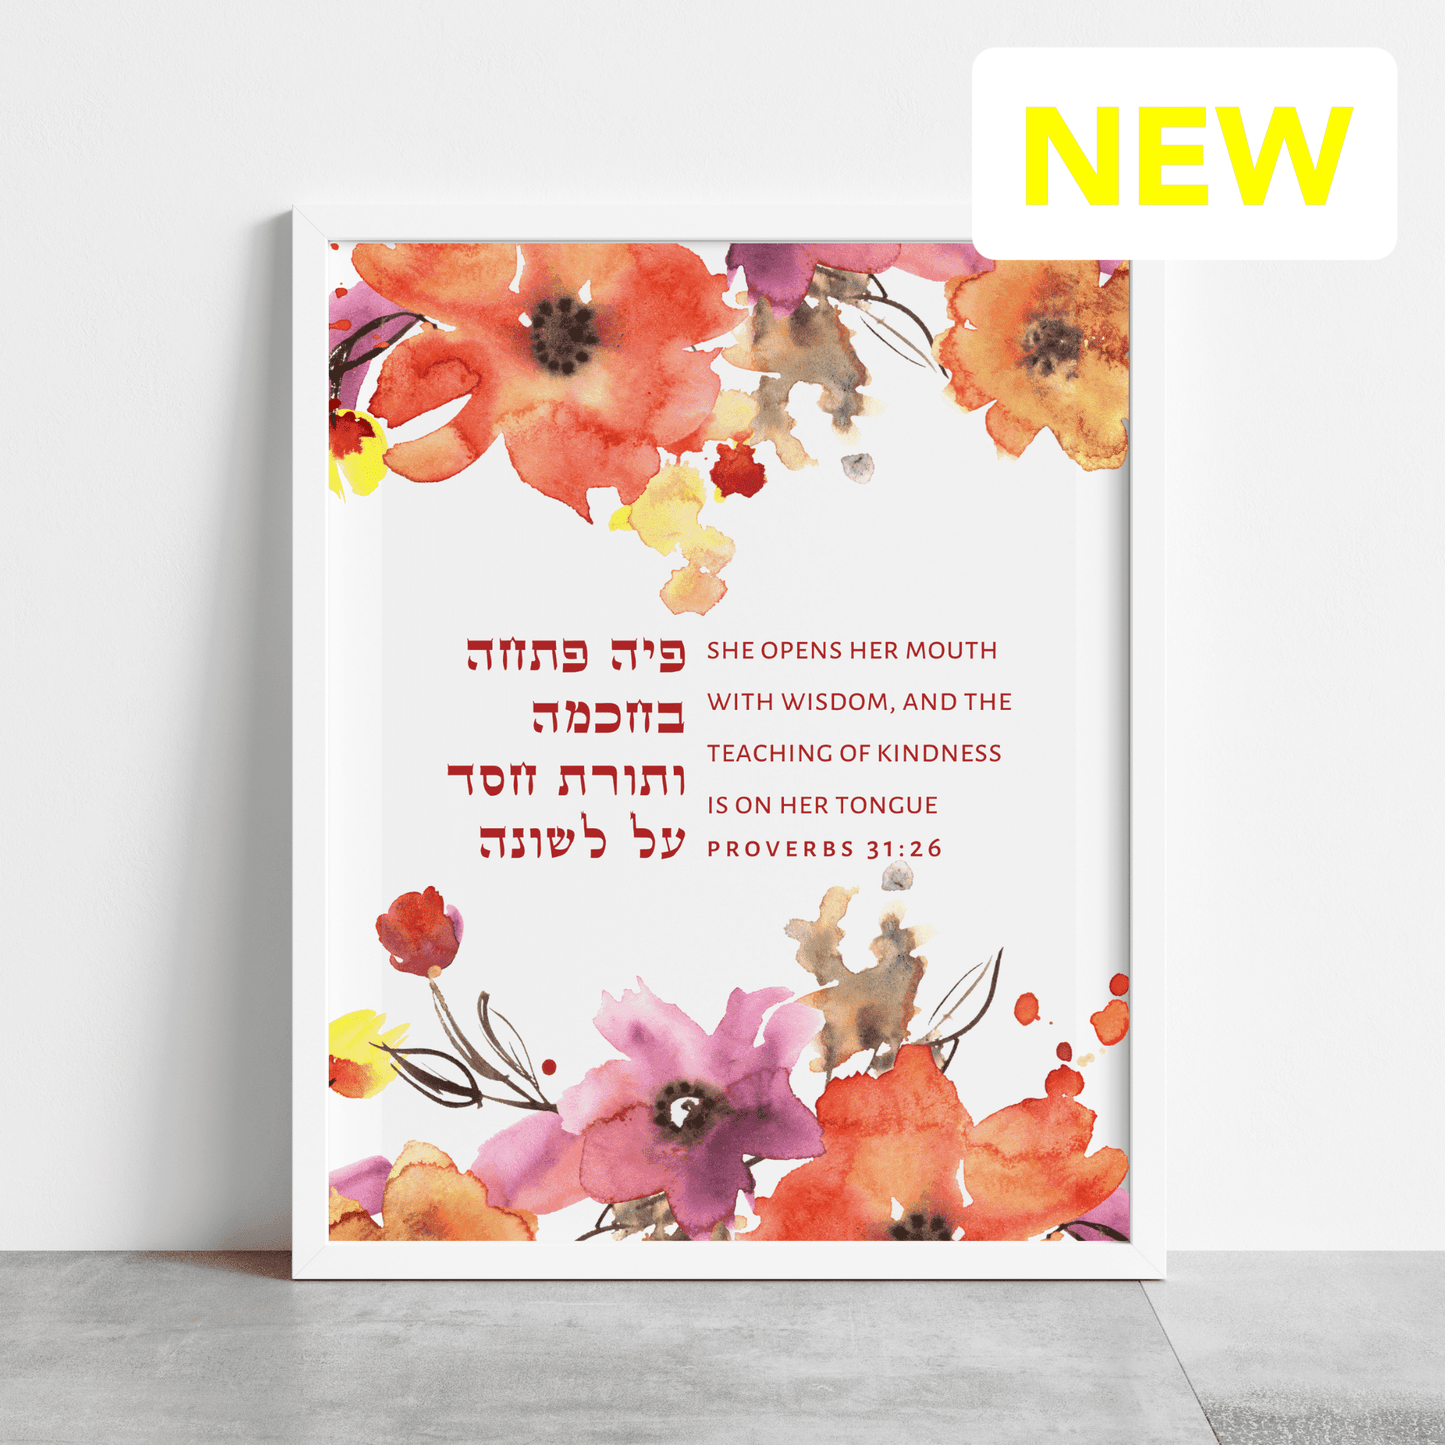 Gelato Proverbs 31:26 Wall Art Proverbs 31:26 | Gifts for Her Wife Anniversary Birthday